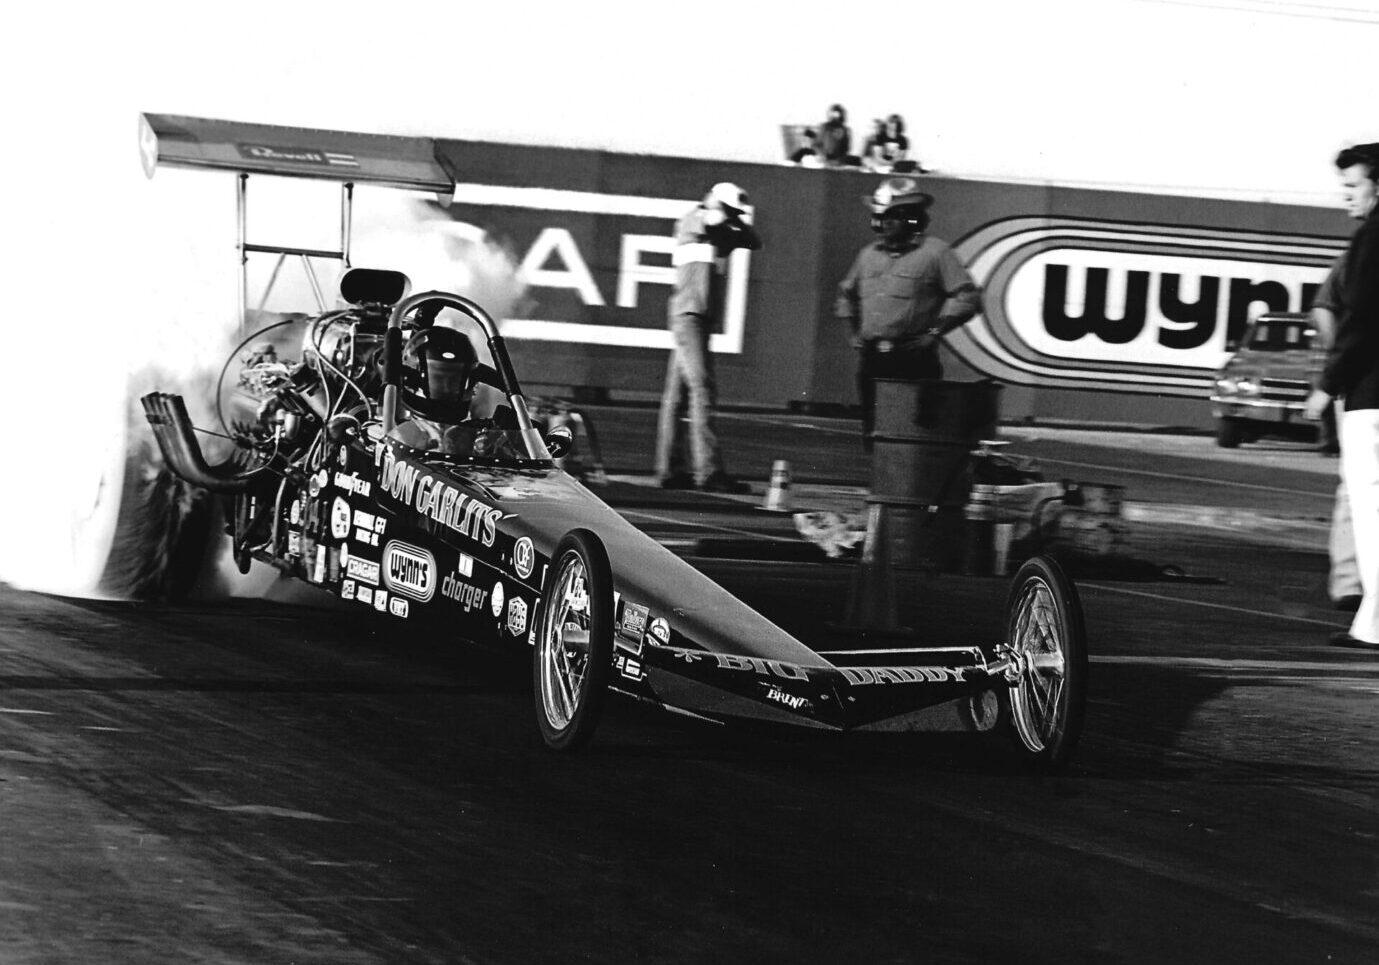 Built in the spring of 1975 by Don Cook and Big Daddy, this car became the most feared top fuel dragster of all time. It consistently ran in the high 240 MPH mark and 5.70 ET bracket. It won Don’s first NHRA World Championship, beating out the likes of Beck, Muldowney and a host of other fine competitors. It became the first top fuel dragster over 250 MPH at Ontario, California on Oct. 12, 1975 with a 5.63 E.T.  This record stood for seven full years. It was retired in the fall of 75’ and then put back in service for a brief period in 1977 to win the Gatornationals. 